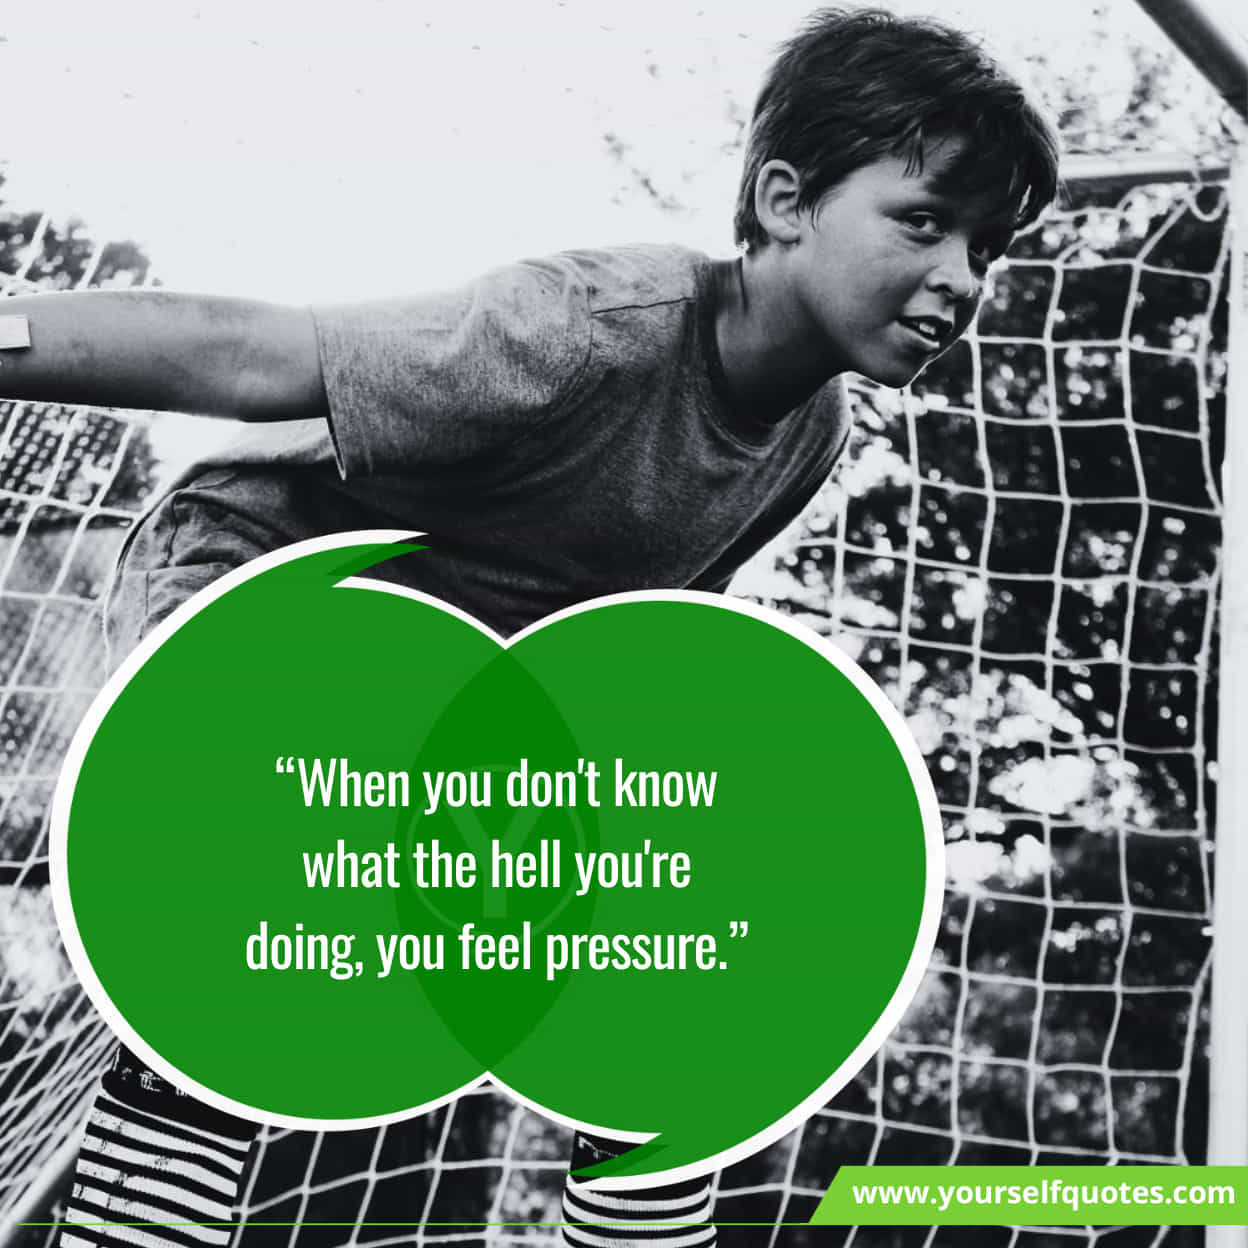 Inspiring Quotes On Football